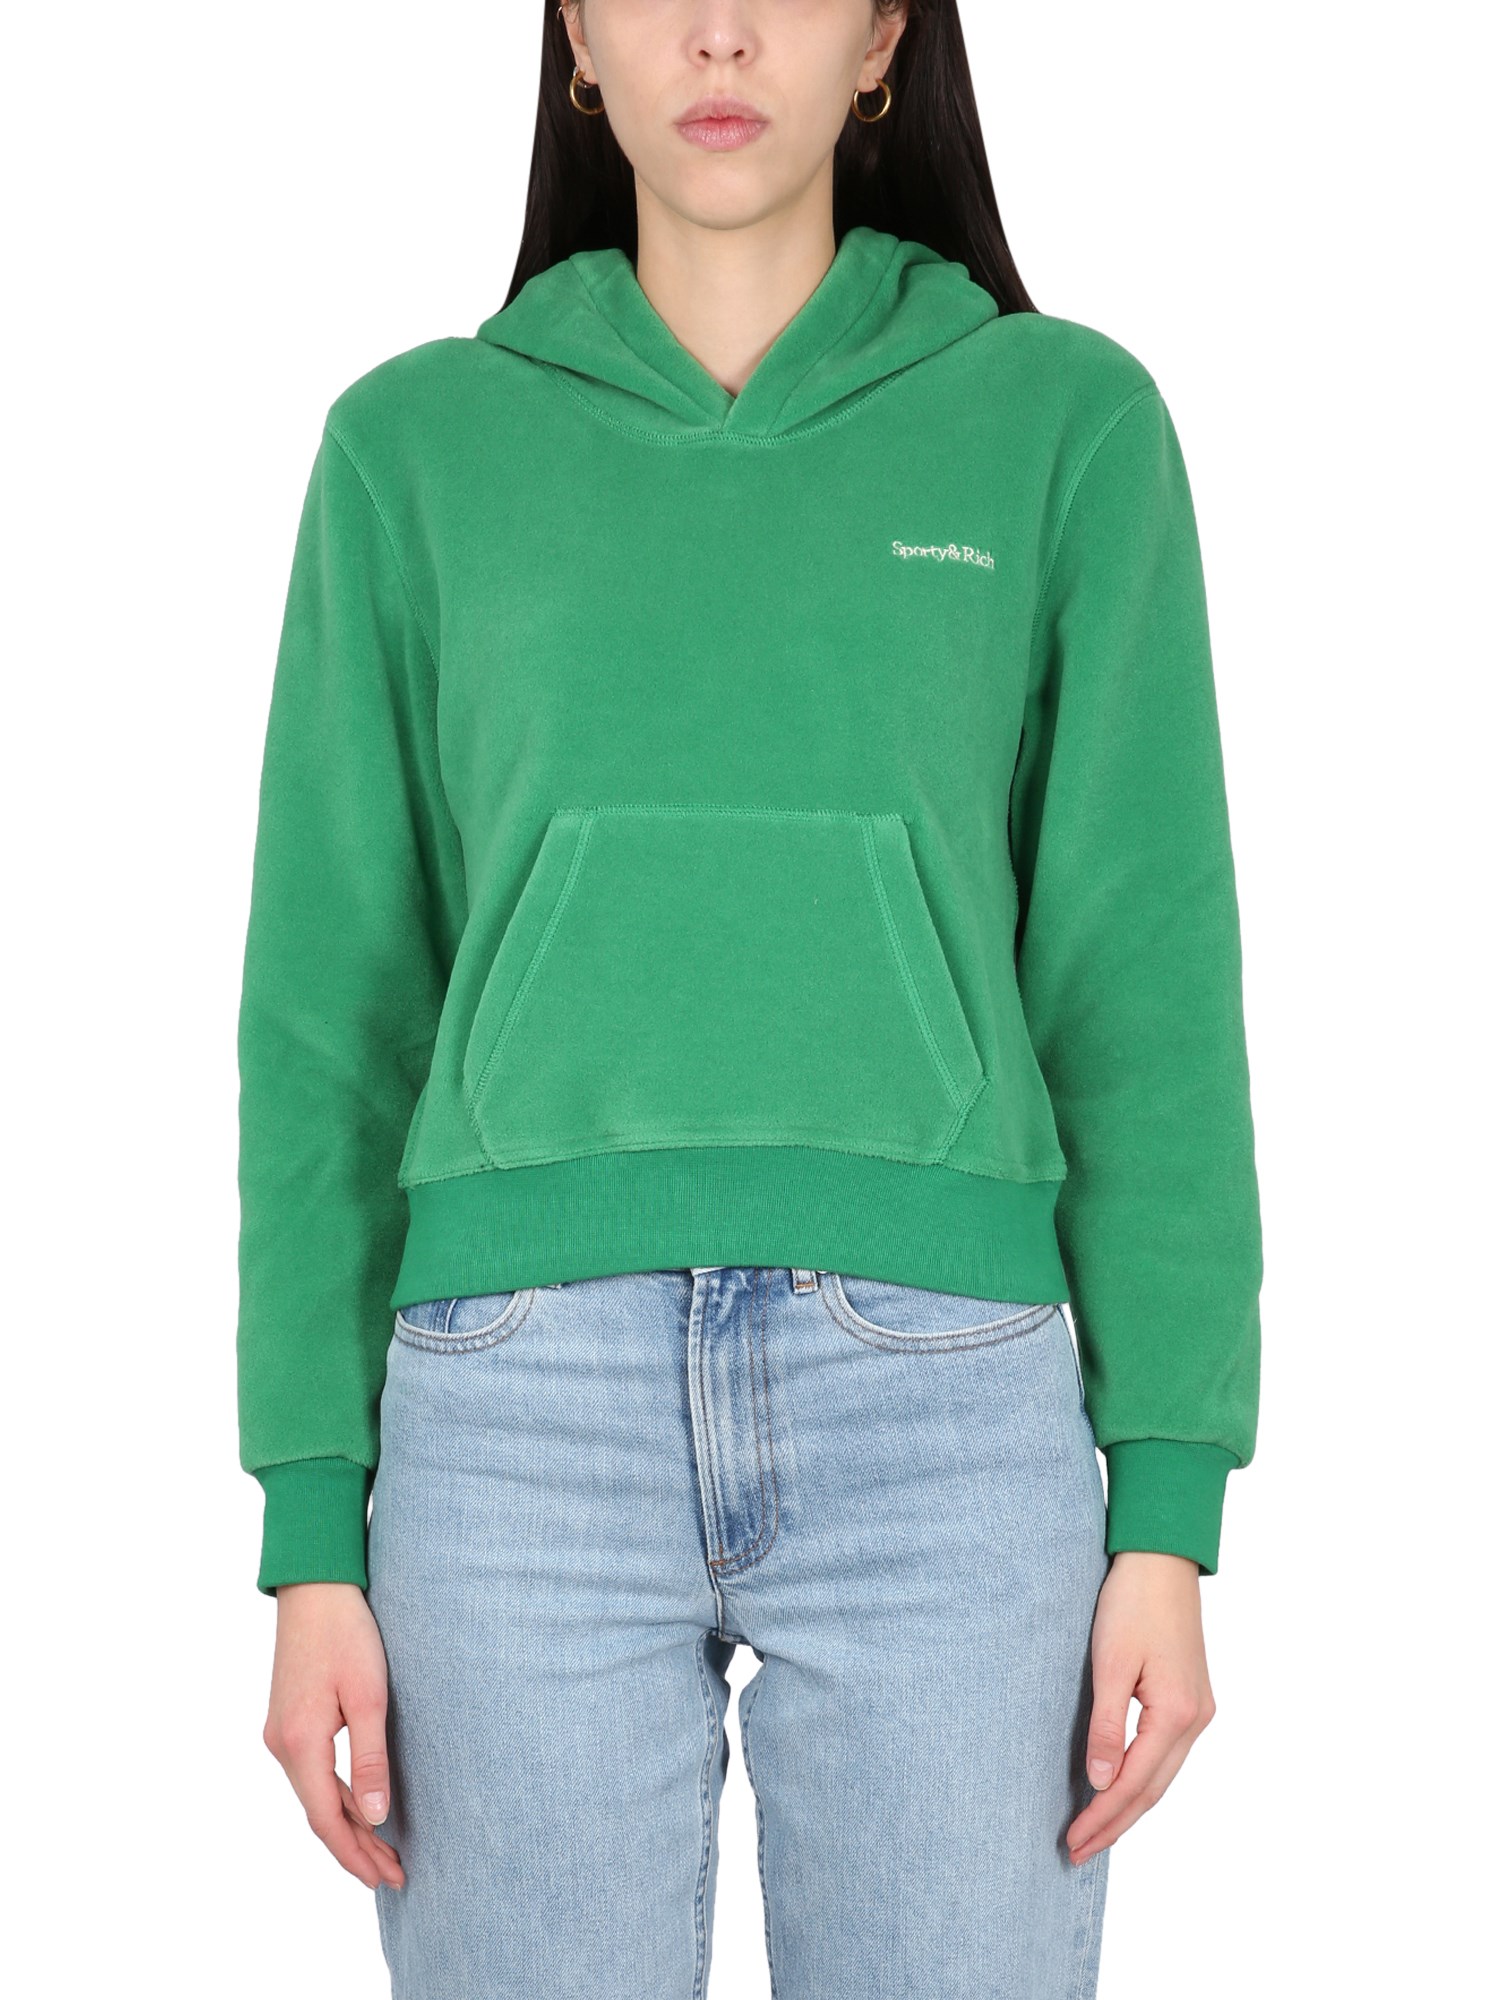 sporty & rich sweatshirt with logo embroidery